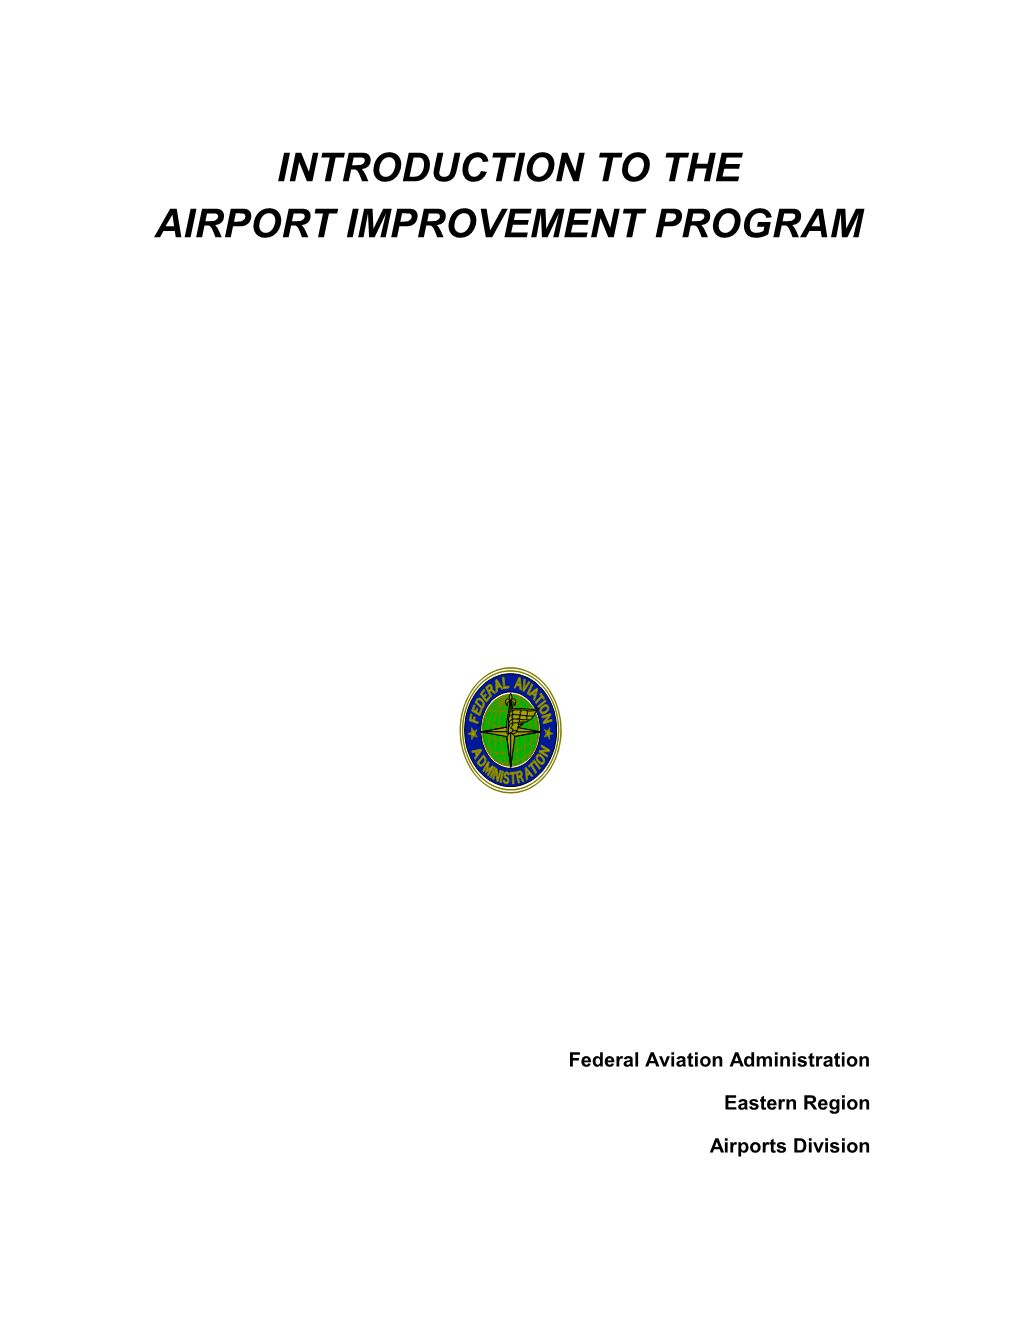 Introduction to the Airport Improvement Program